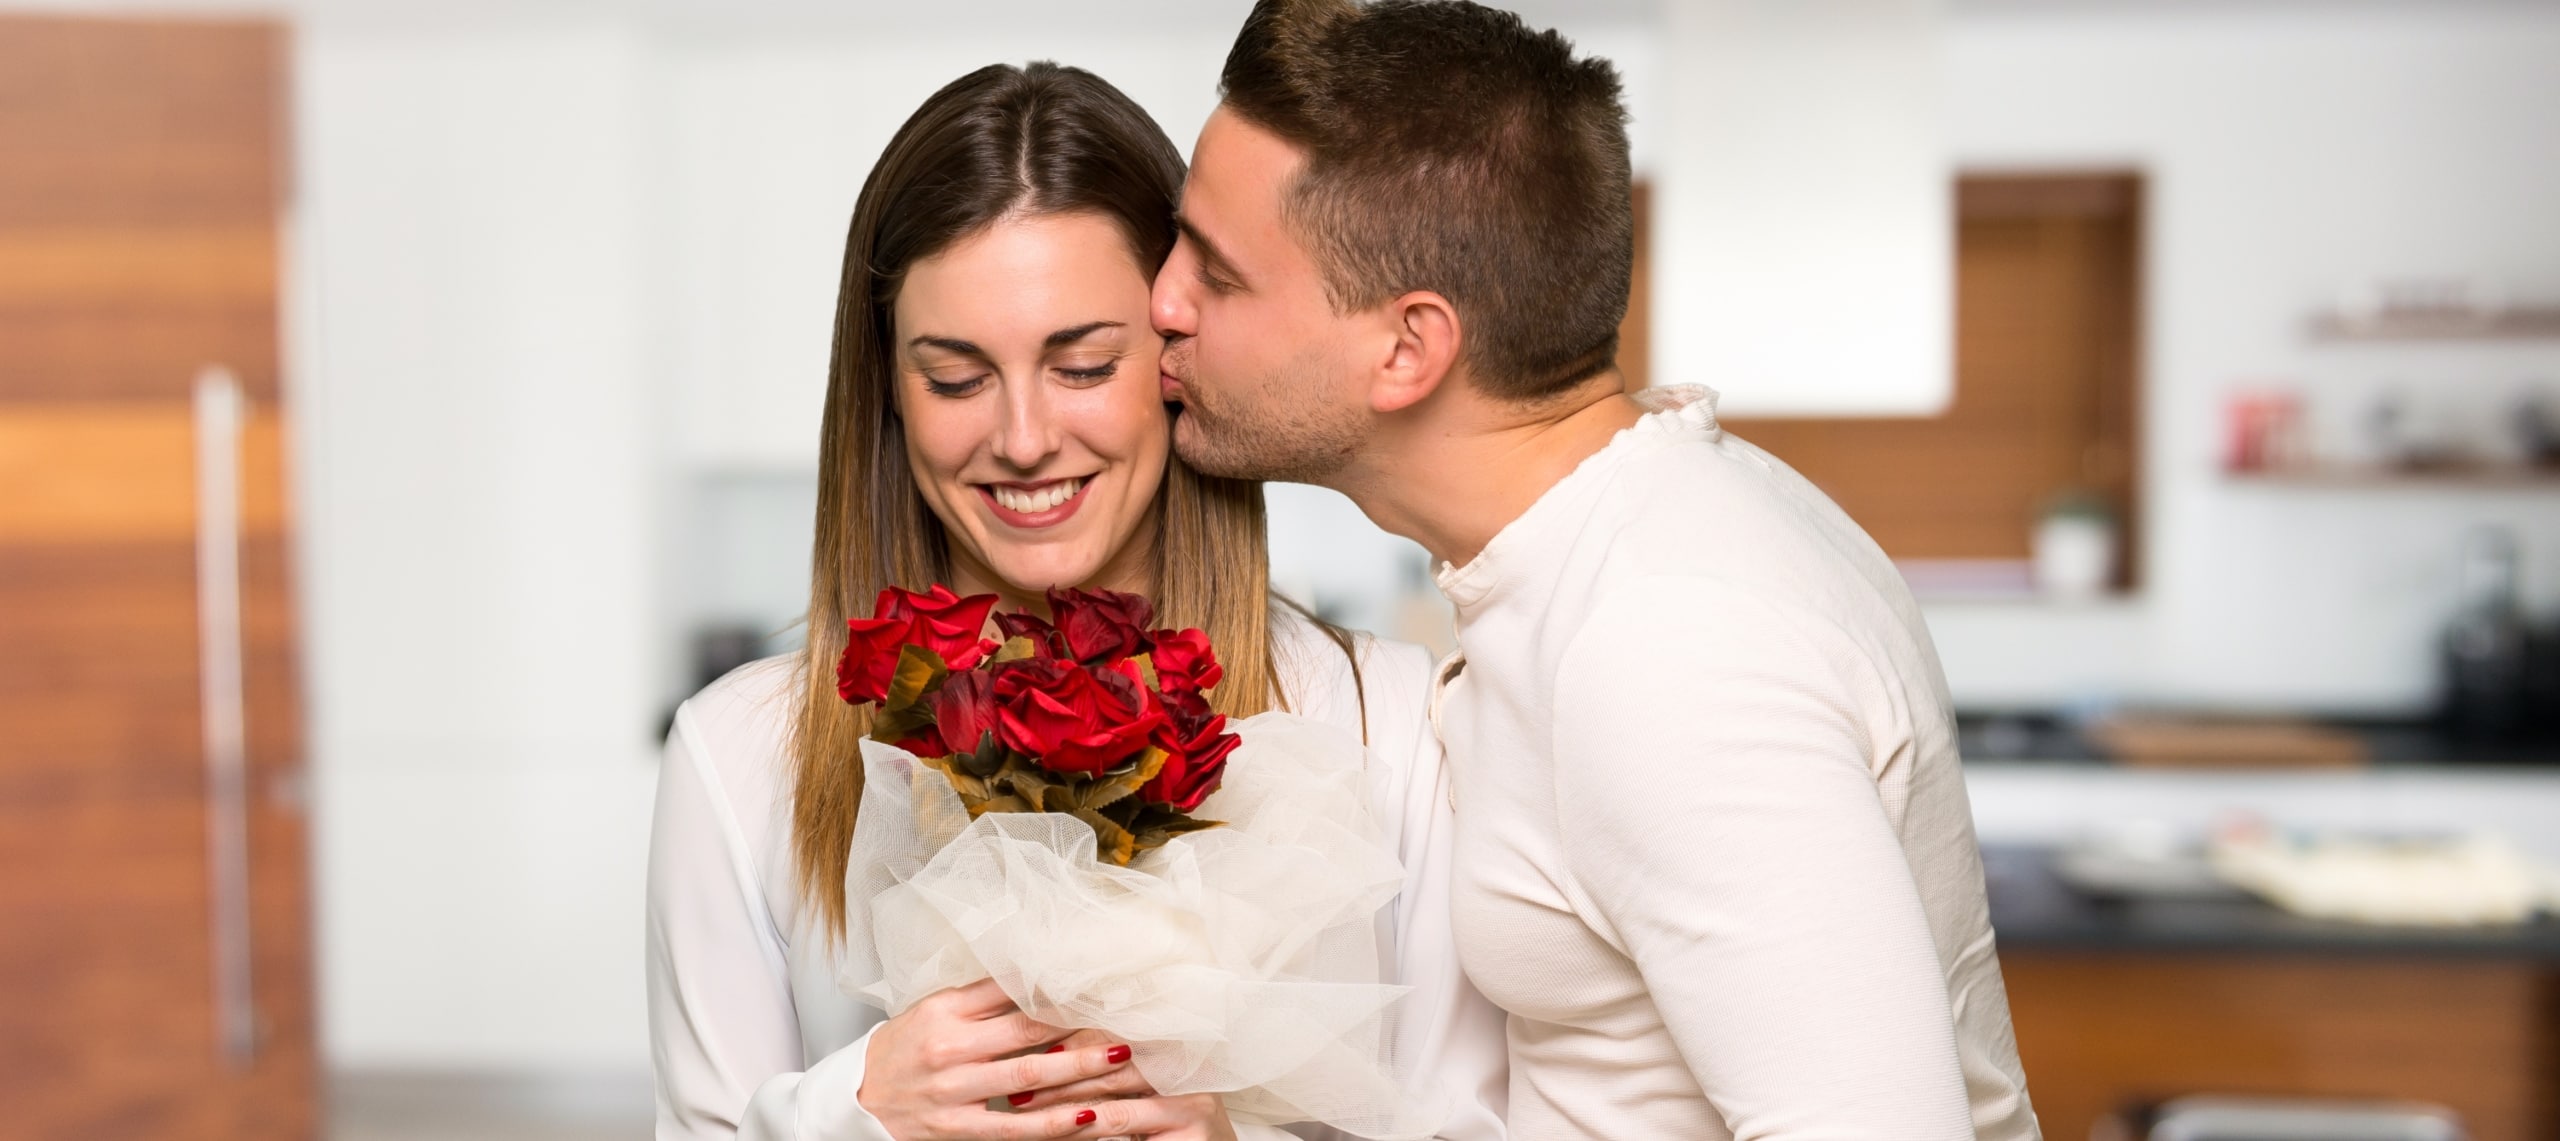 5 Ways to Rekindle Romance in Your Marriage pic